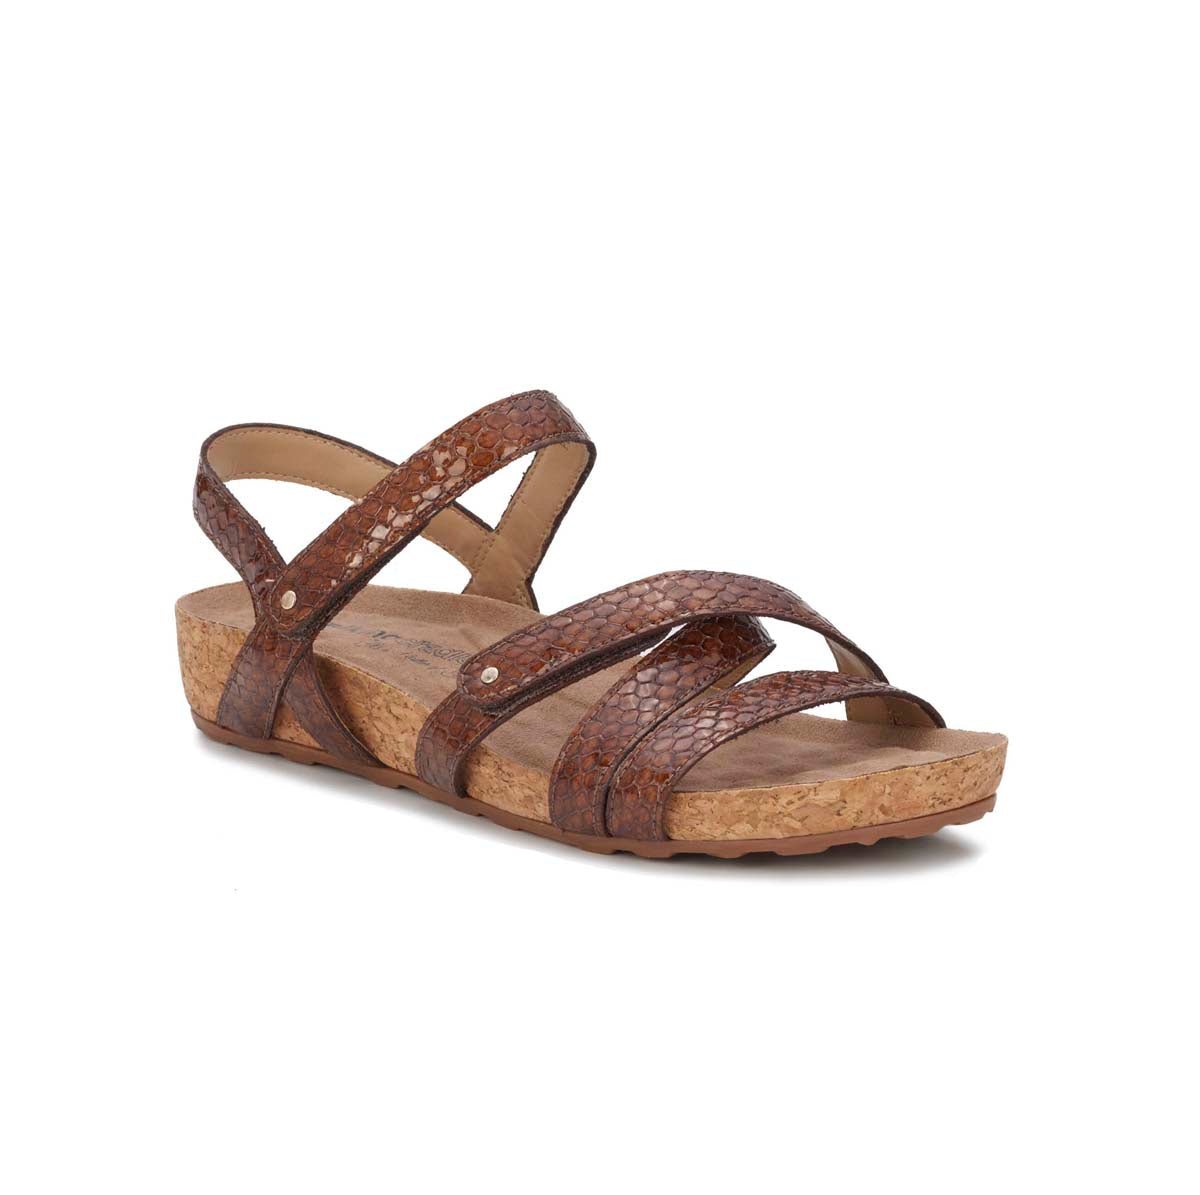 WALKING CRADLES WC POOL WOMEN STRAPPY SANDAL IN NUTMEG SNAKE PRINT PATENT - TLW Shoes